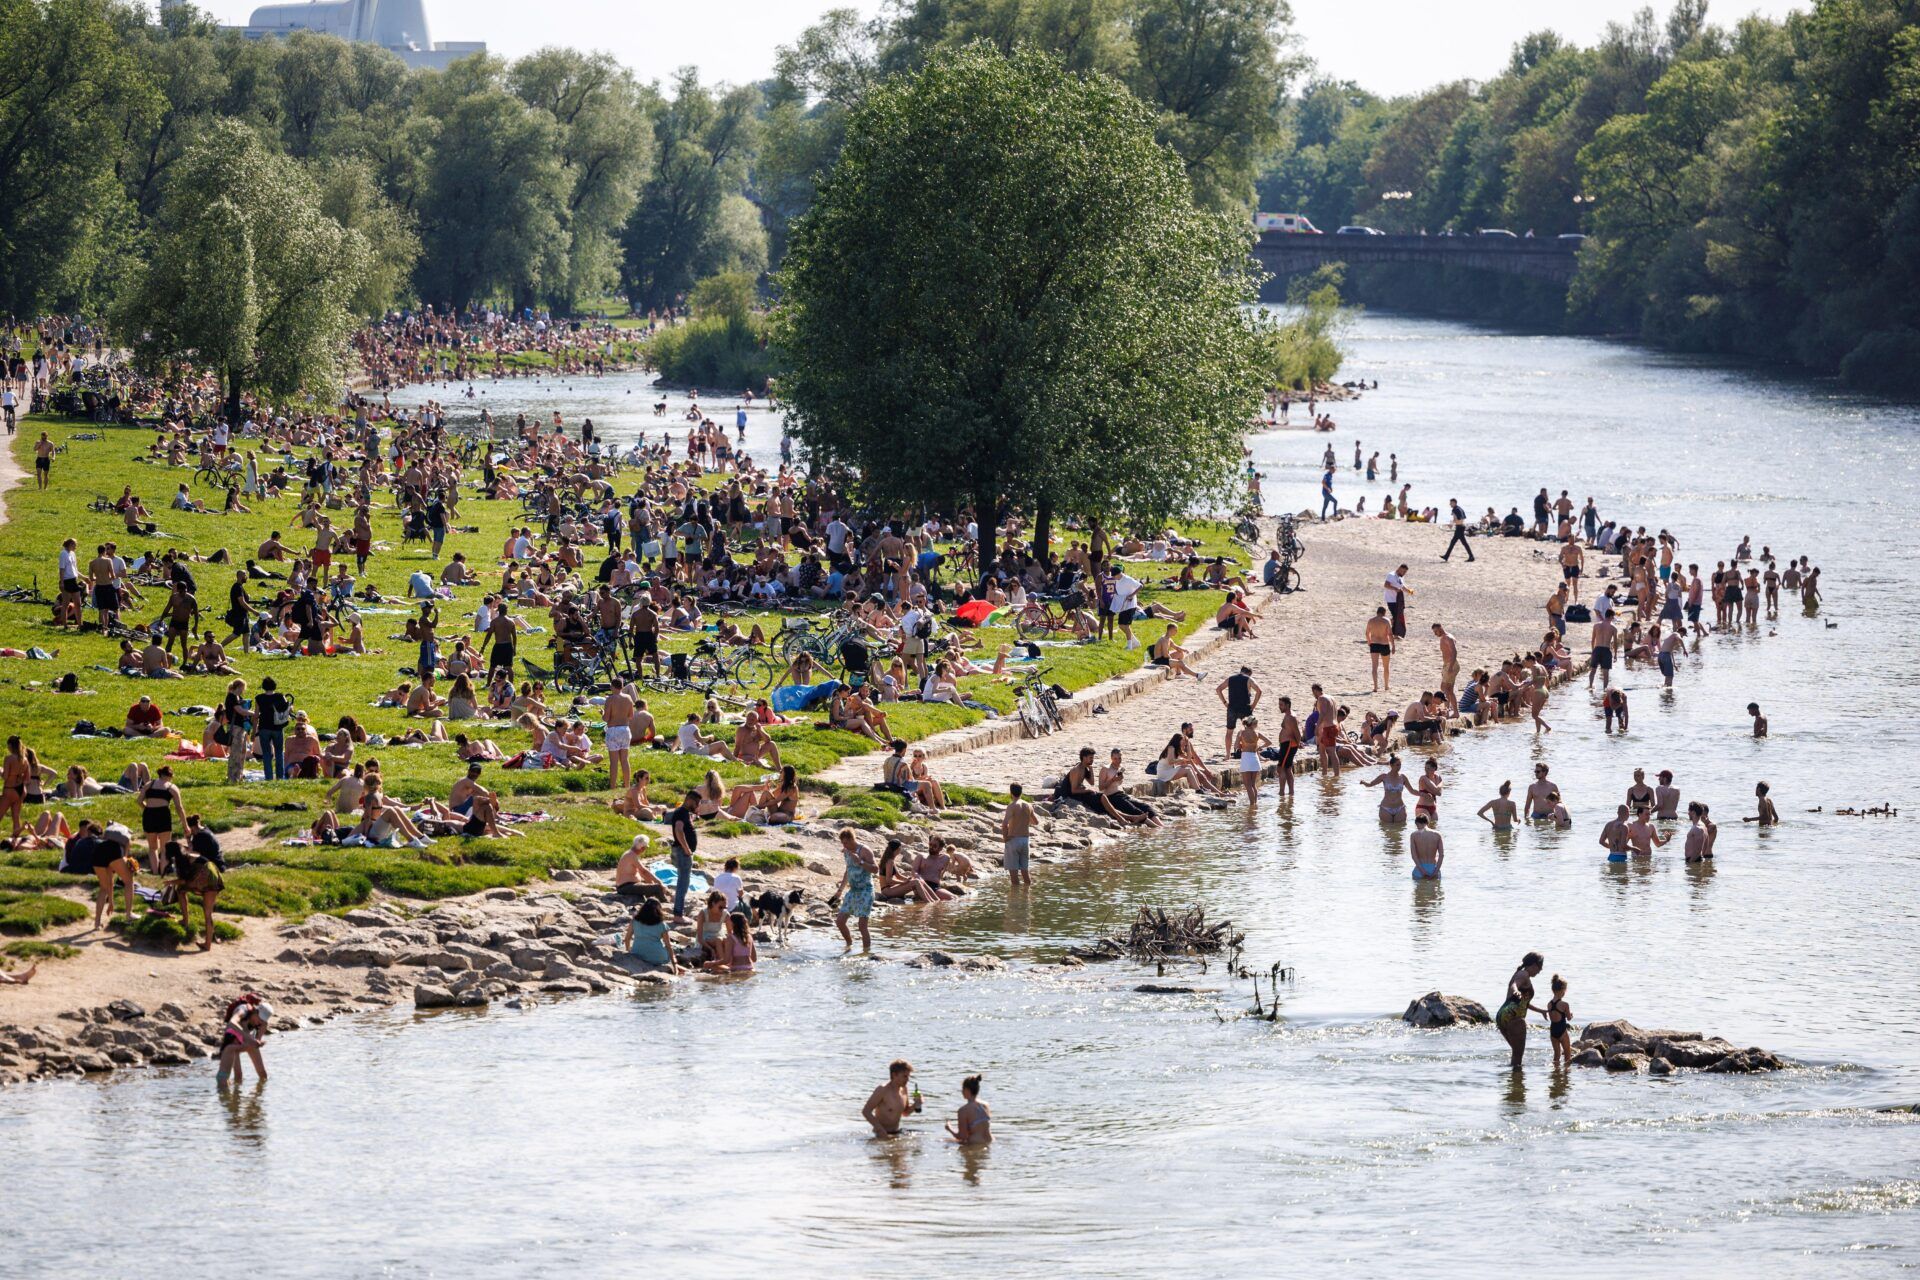 Numerous people bathe in the Isar River in summer heat. (Photo by Matthias Balk/dpa/Alamy Live News)